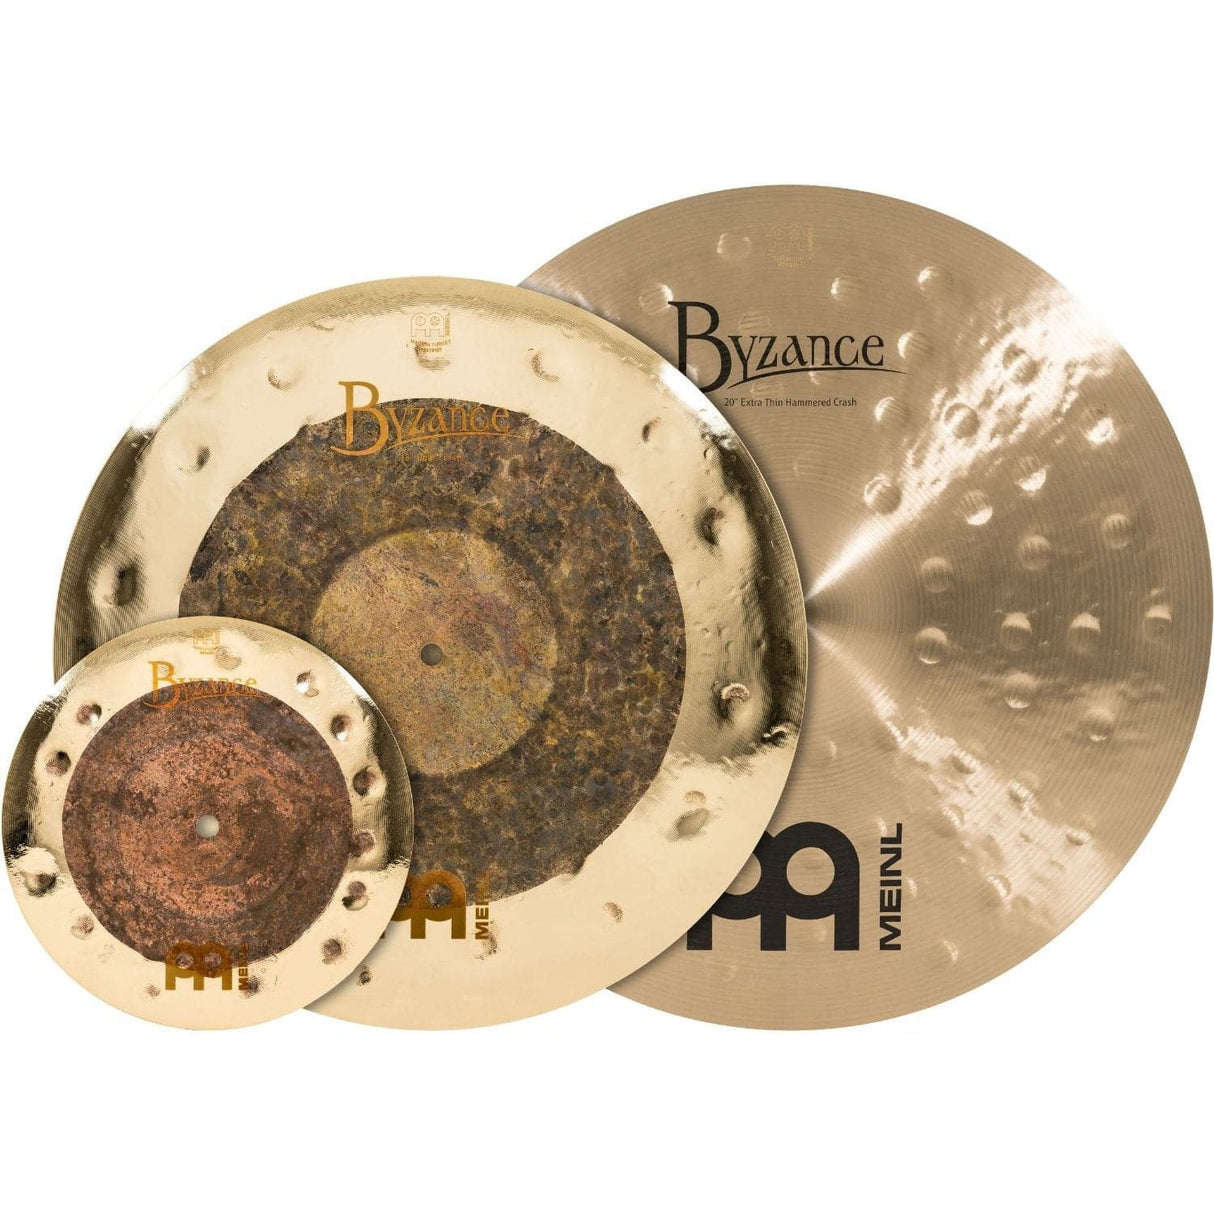 Meinl Byzance Mixed Crash/Splash Cymbal Pack - Dual 18" & 10", Extra Thin Hammered 20"